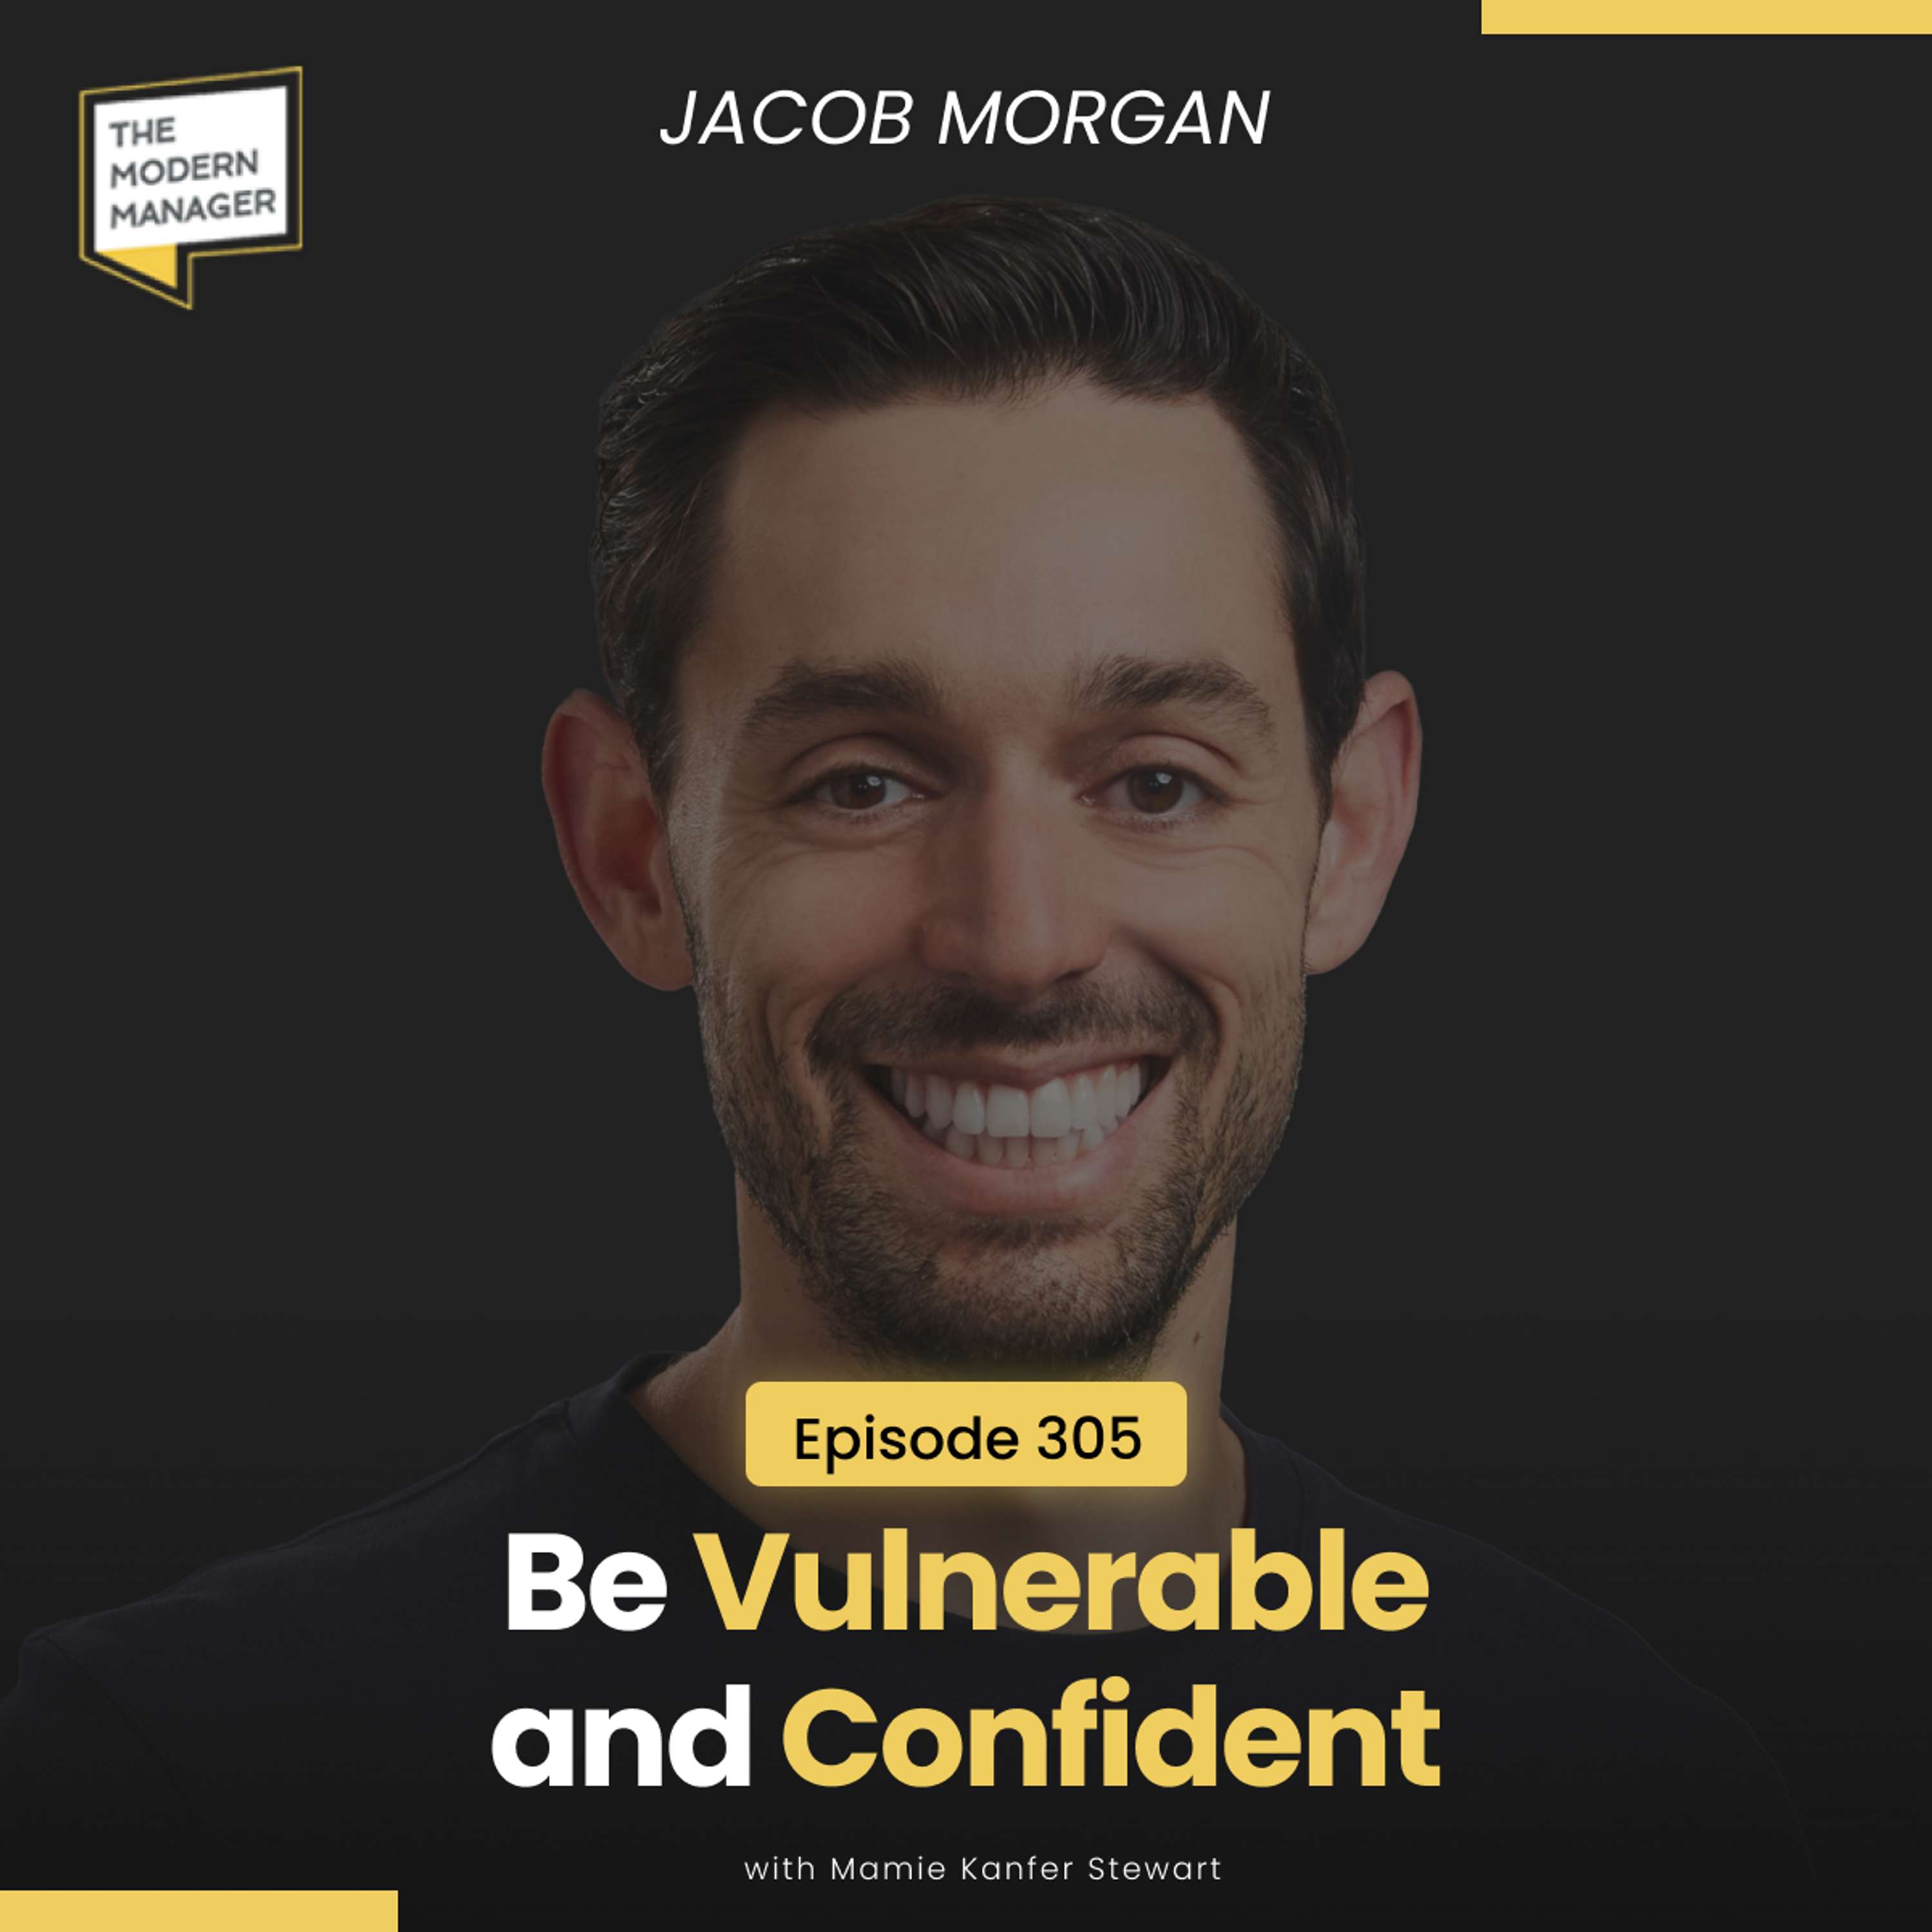 305: Be Vulnerable and Confident with Jacob Morgan